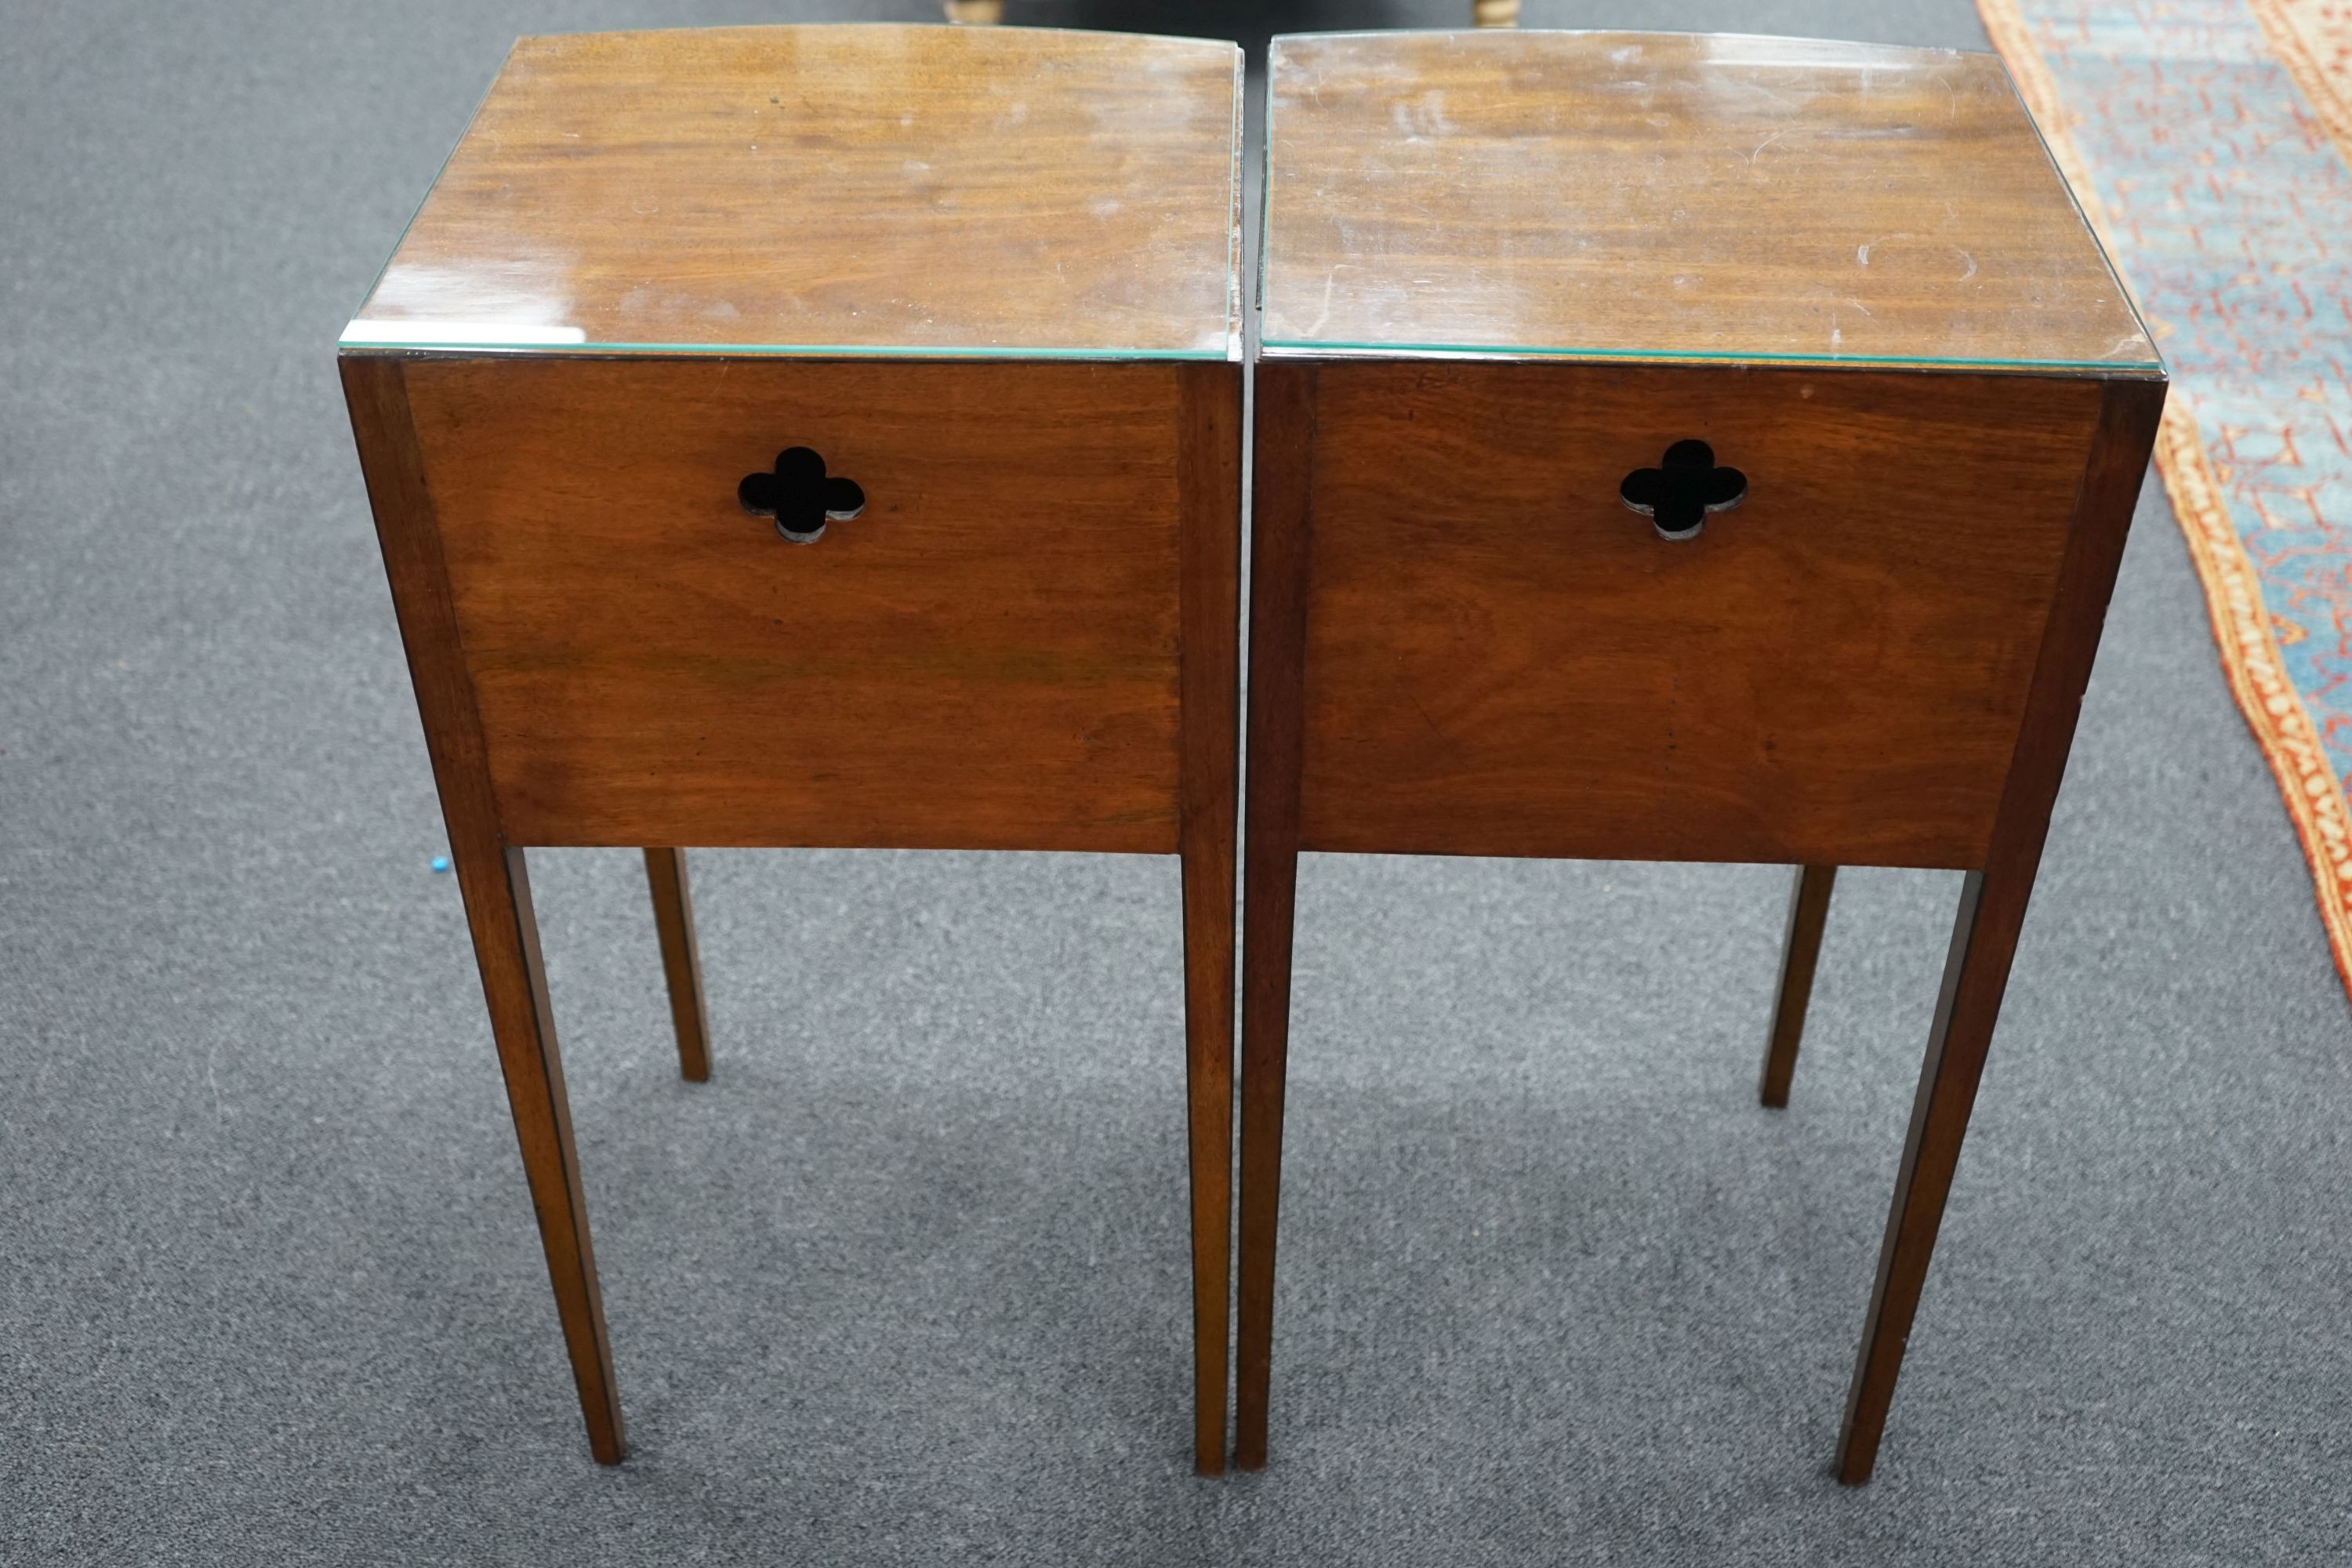 A pair of George III style mahogany bow front bedside cabinets, width 38cm, depth 36cm, height 76cm